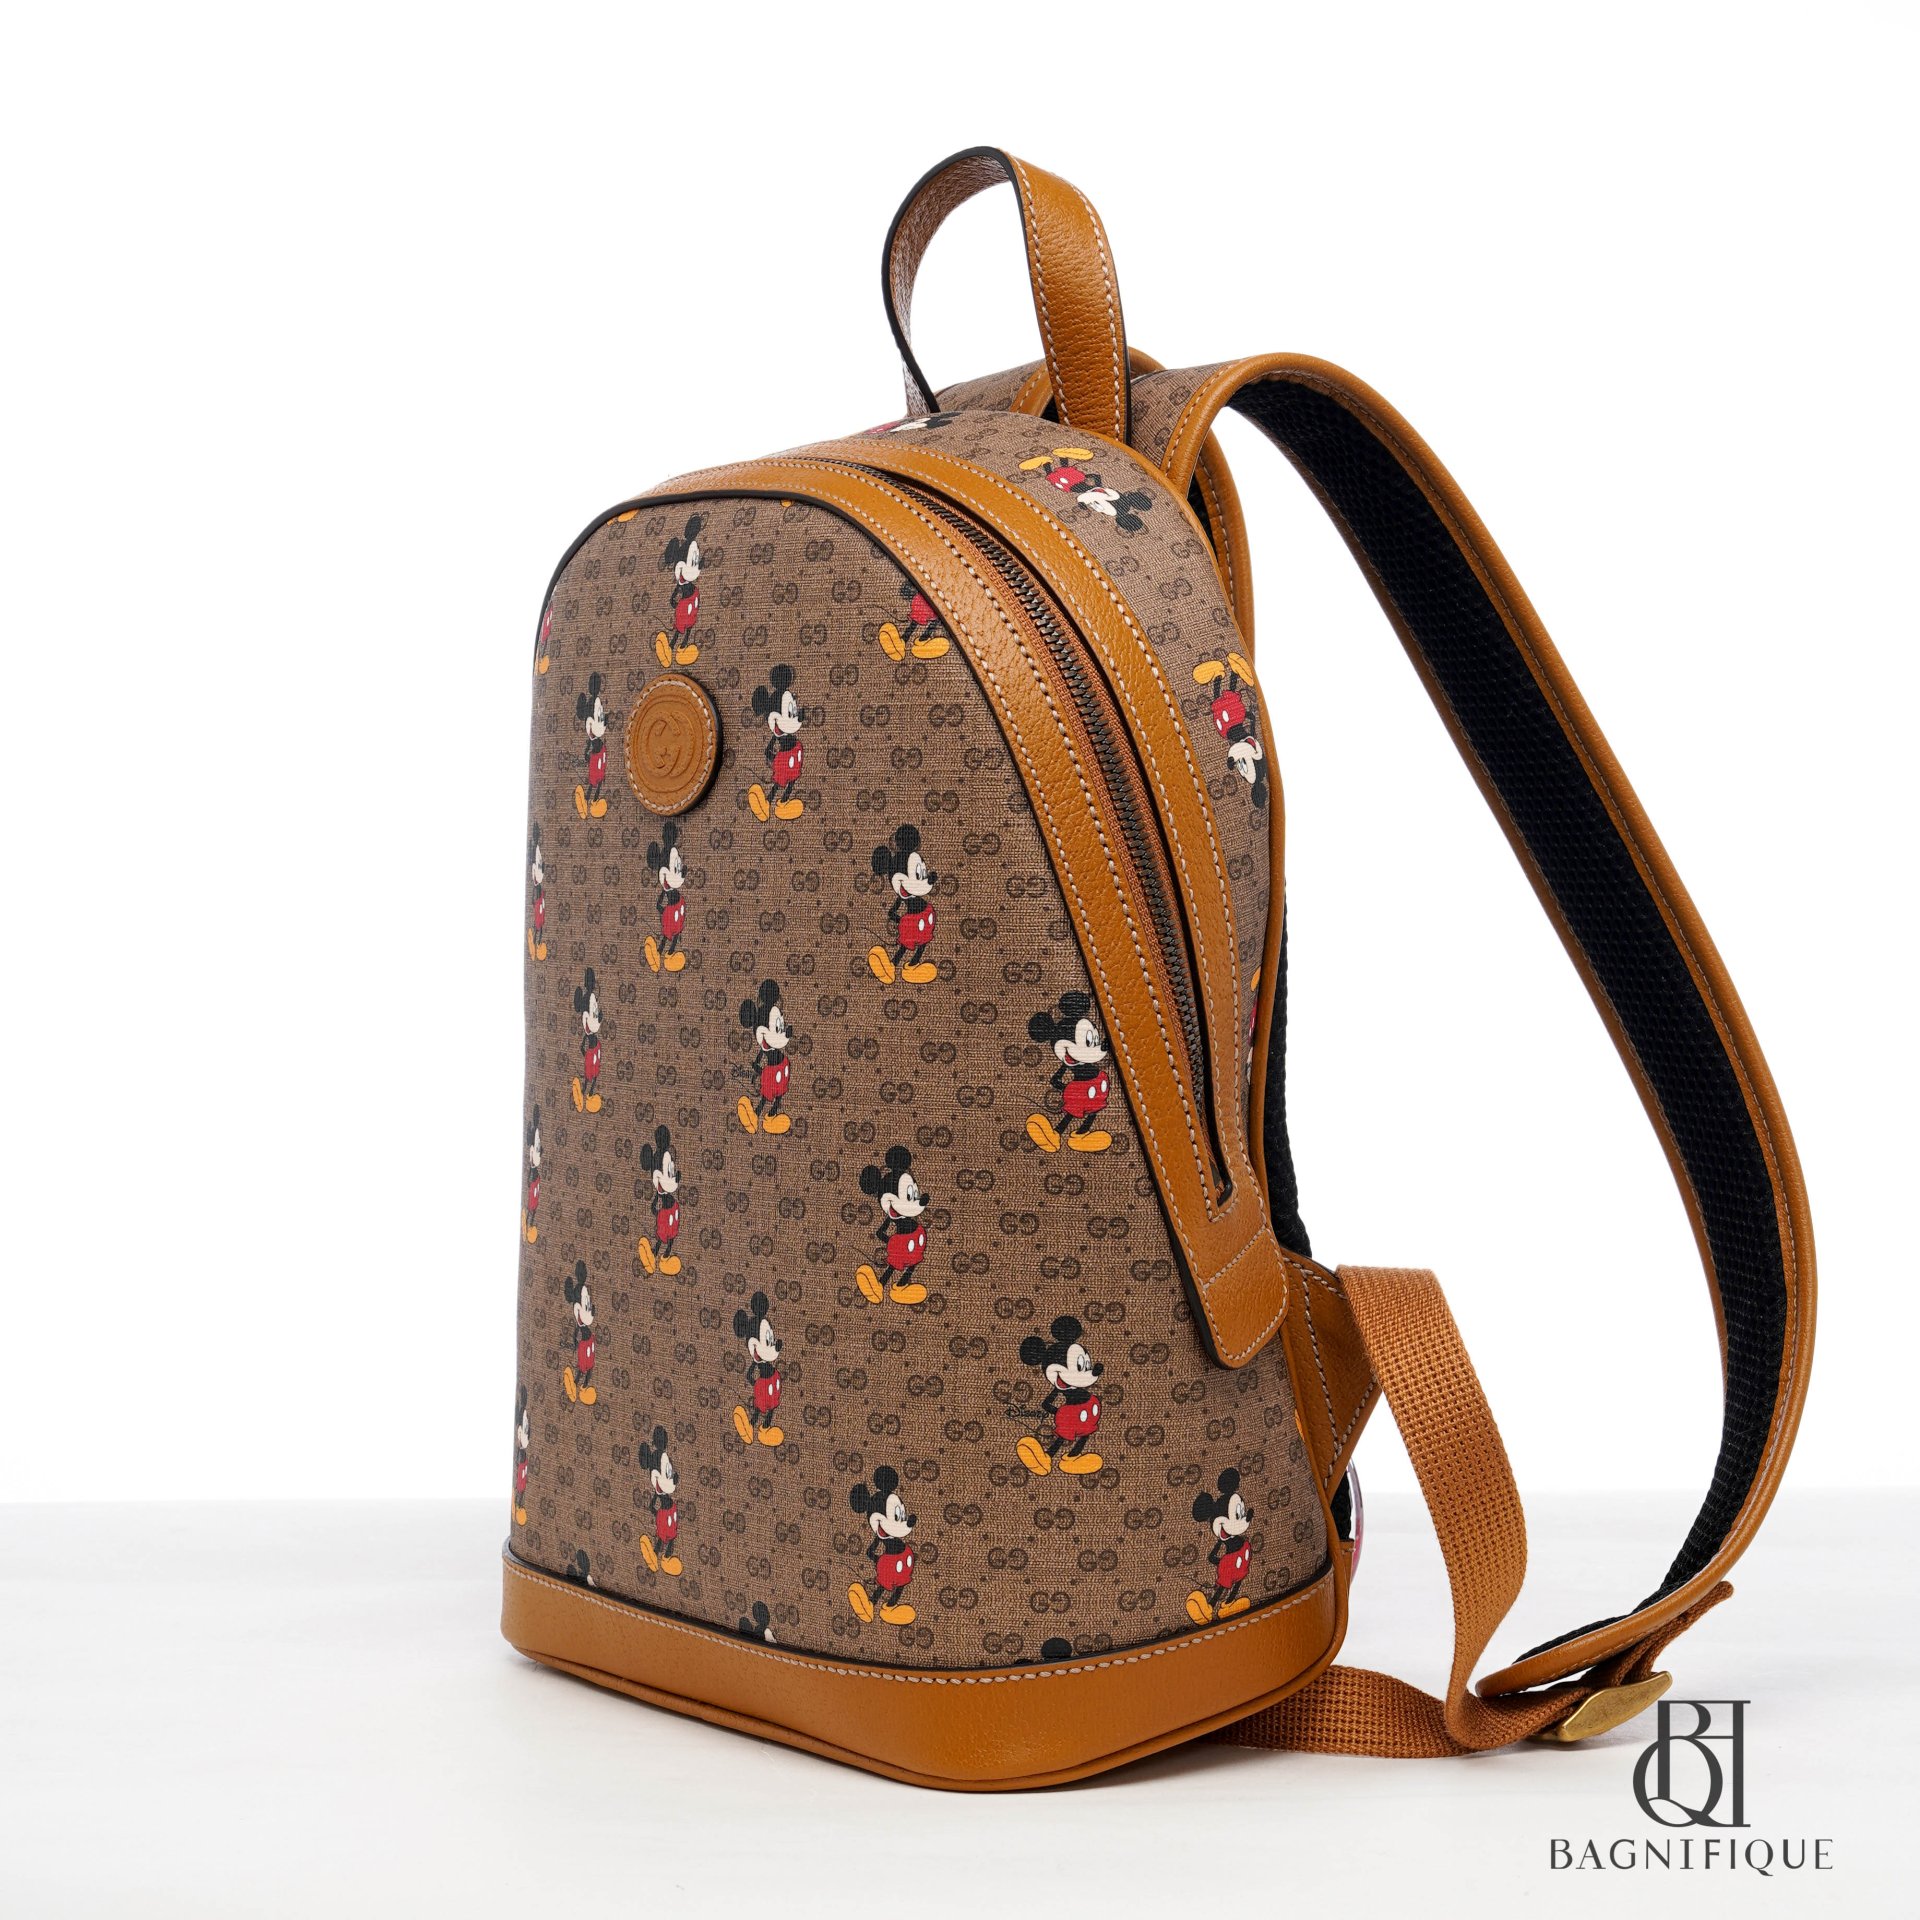 Gucci X Disney Mickey Mouse-Print Backpack